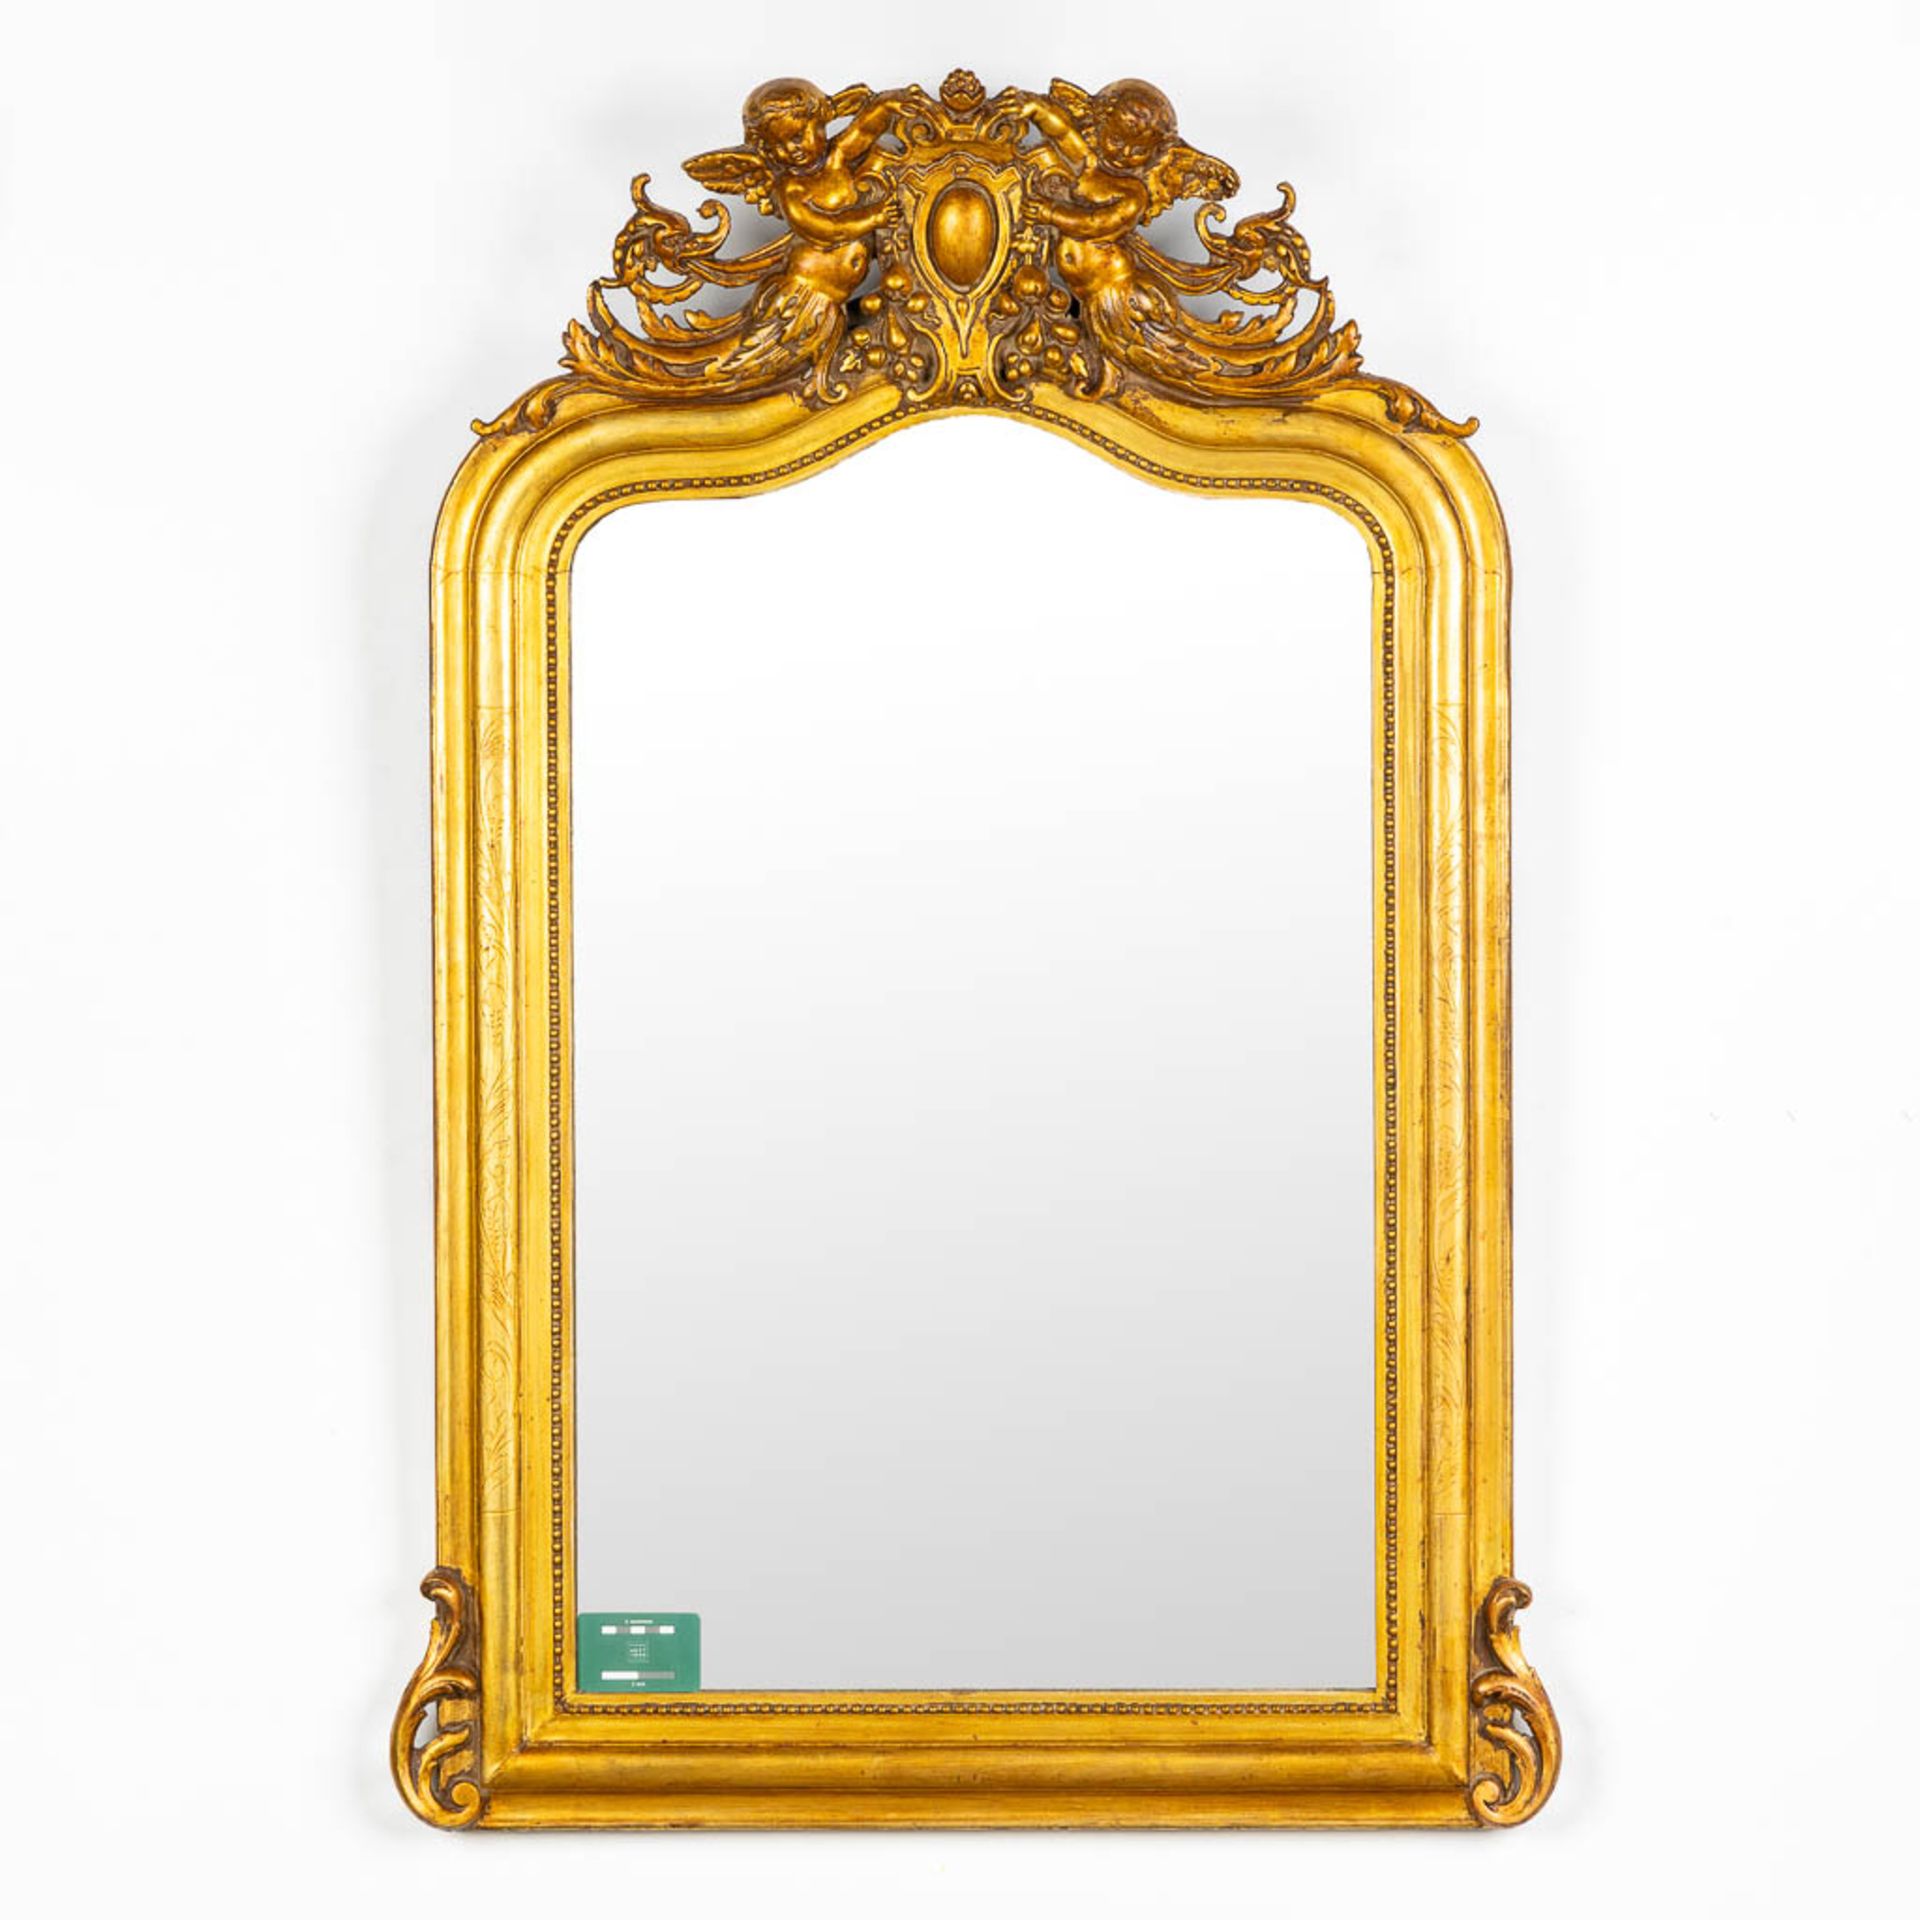 An antique mirror, gilt wood and stucco. Circa 1900. (W:82 x H:122 cm) - Image 2 of 11